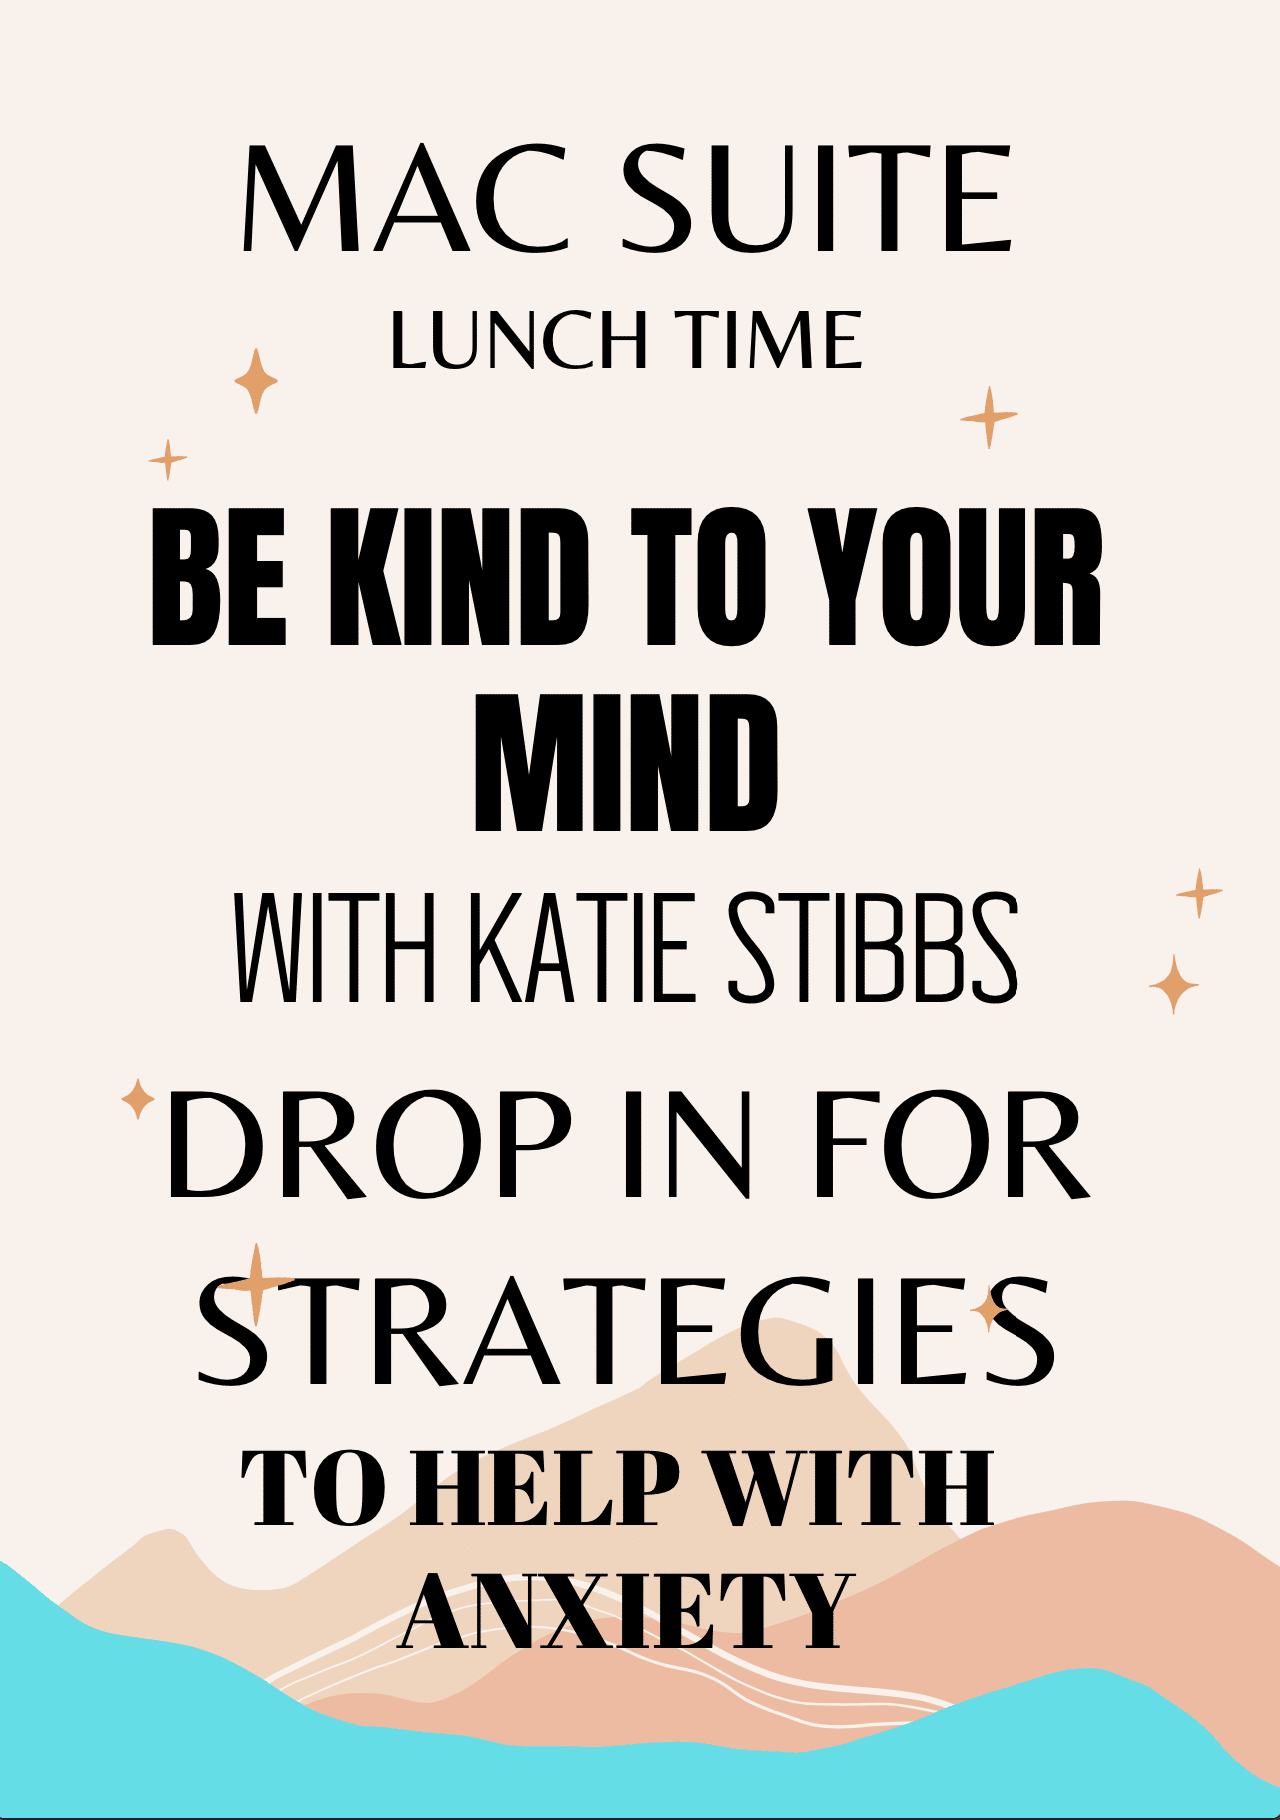 Mac Suite Lunch Time - Be Kind To Your Mind With Katie Stibbs